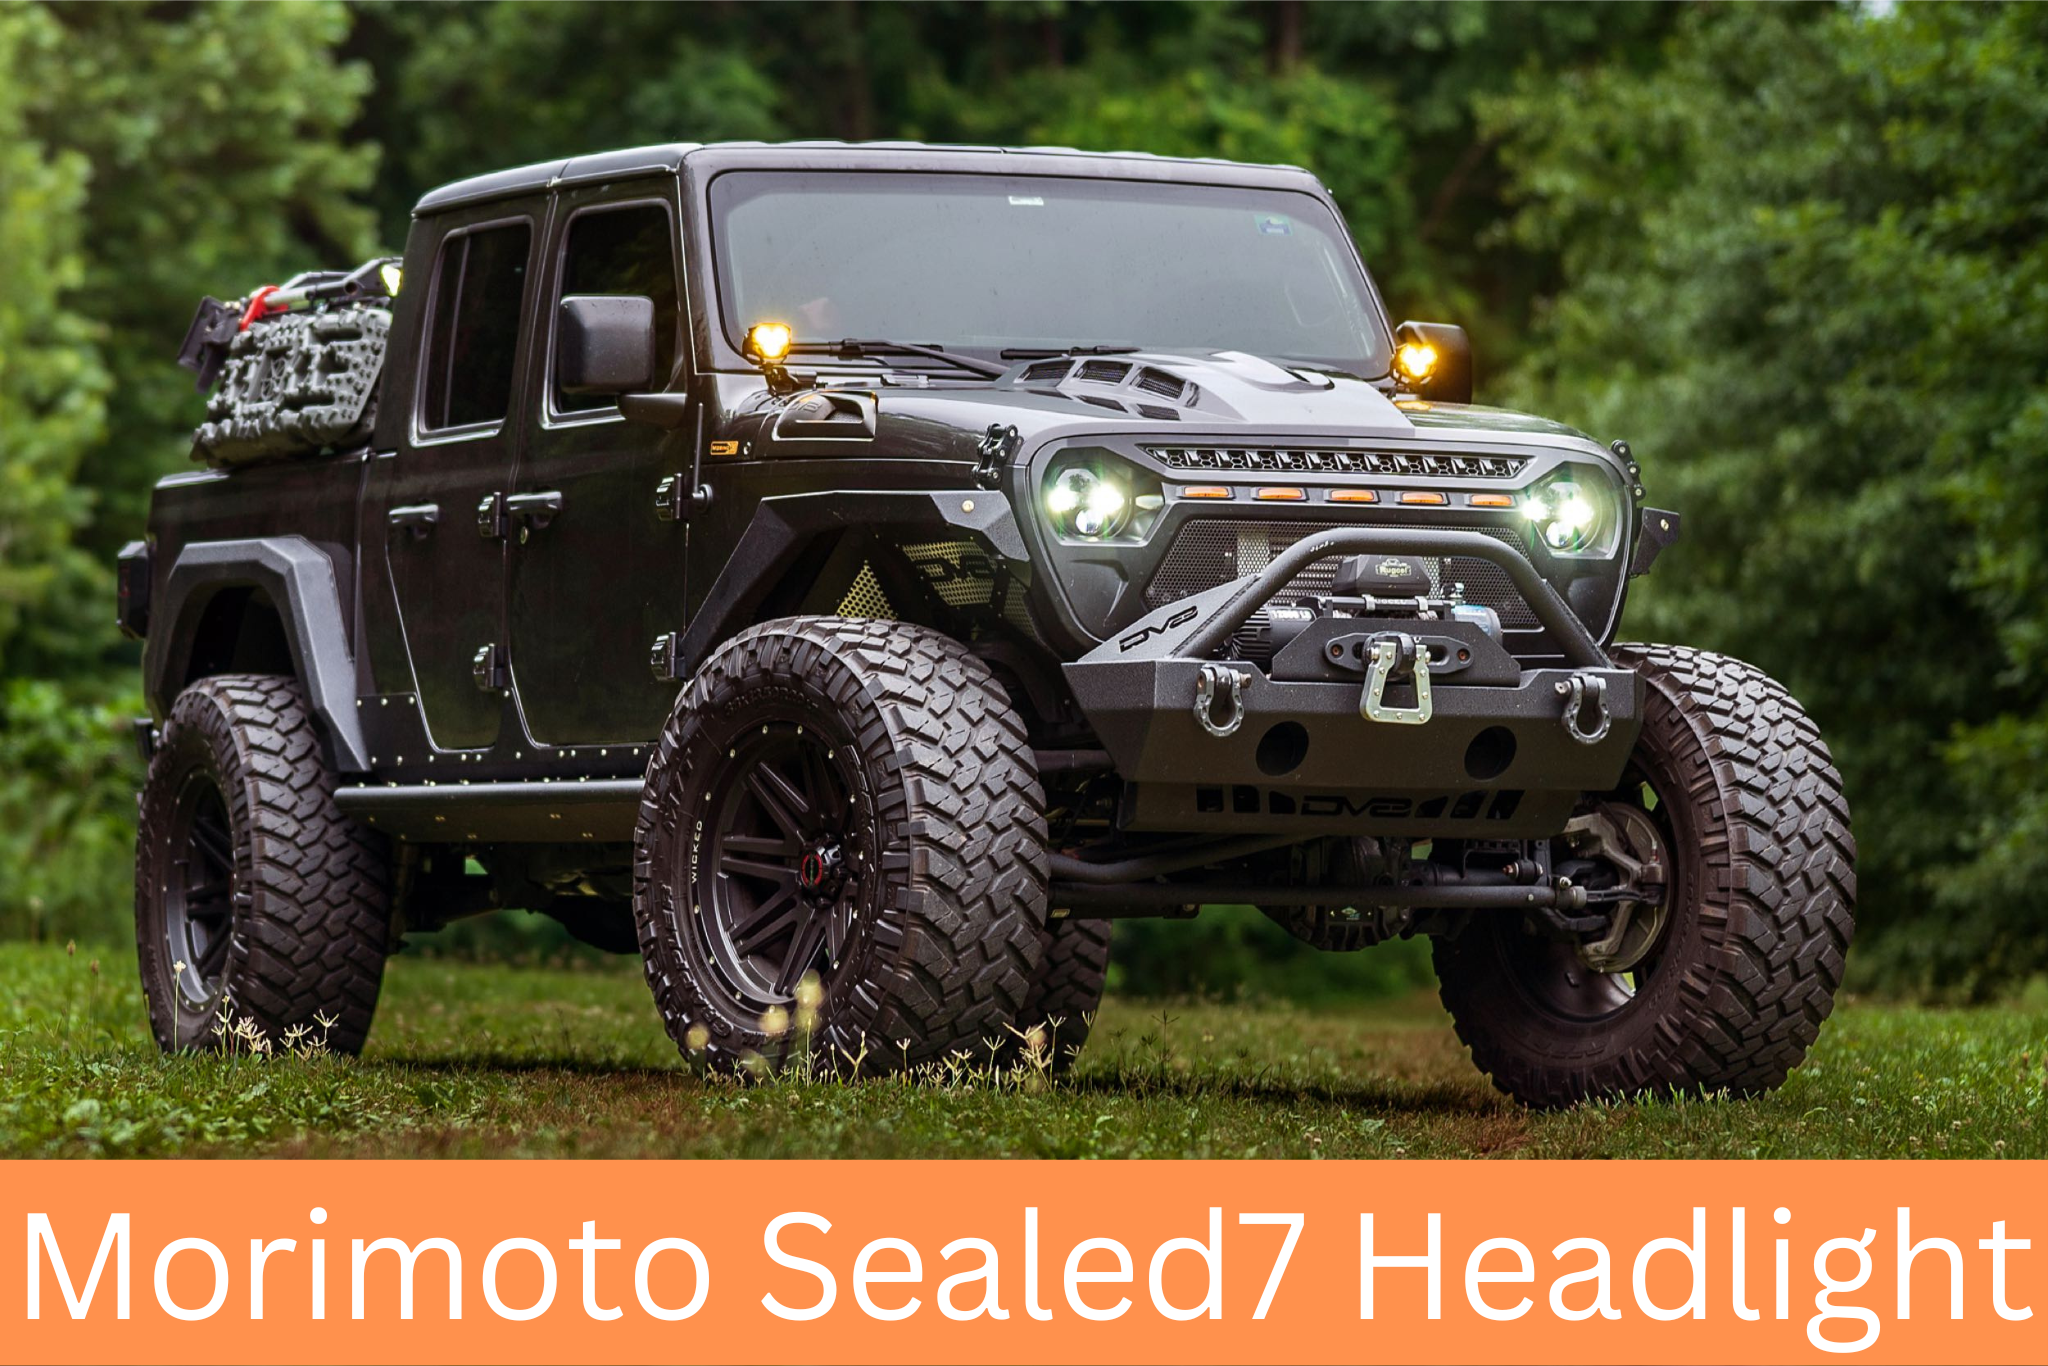 The 2018+ Jeep Wrangler Headlights You've Been Waiting For